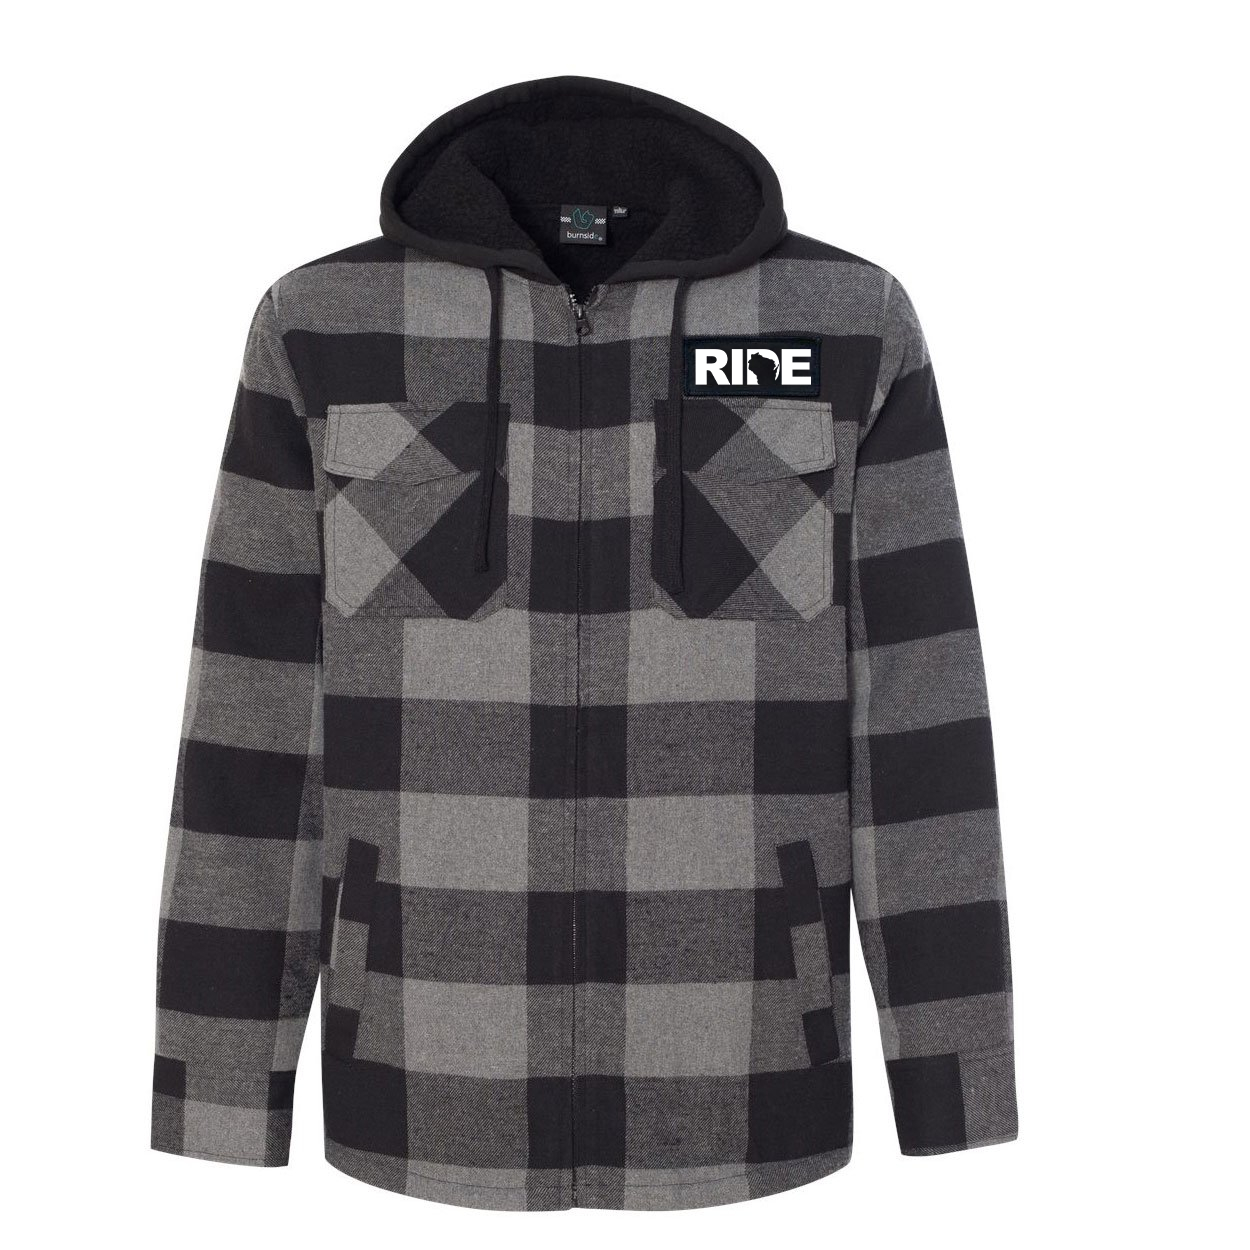 Ride Wisconsin Classic Unisex Full Zip Woven Patch Hooded Flannel Jacket Black/Gray (White Logo)